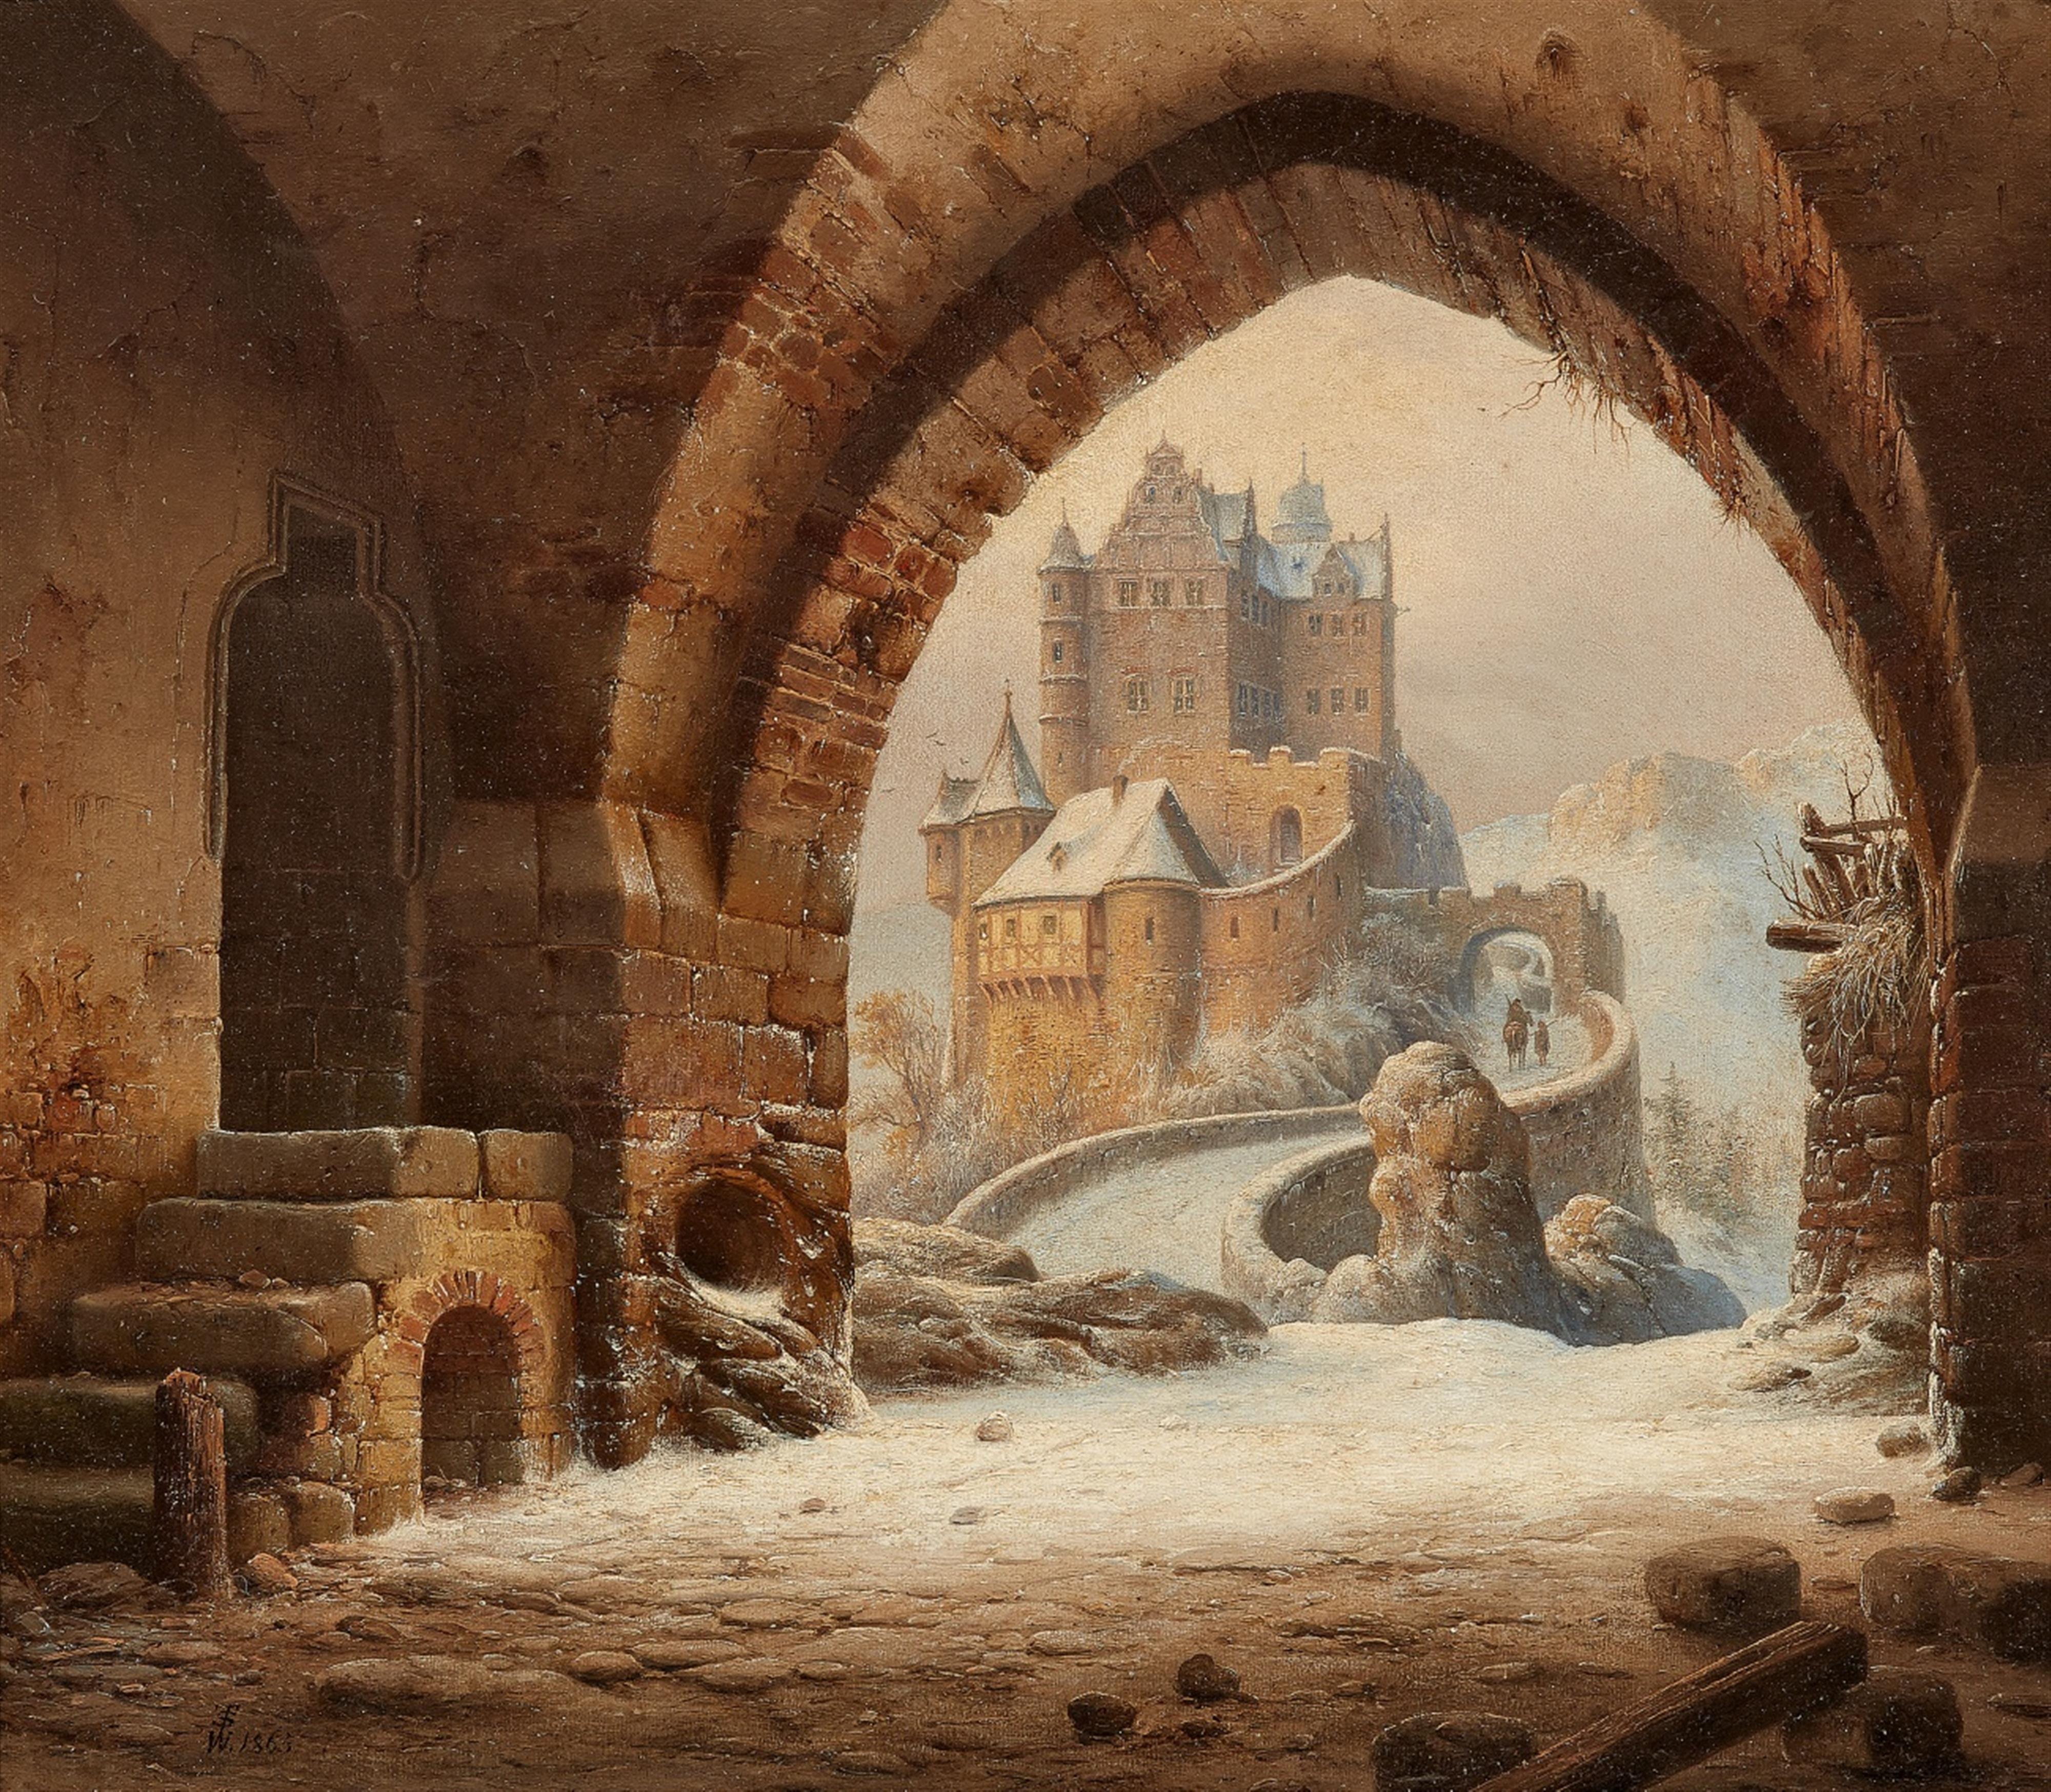 Wilhelm Steuerwaldt - An Archway with a View of a Medieval Castle - image-1